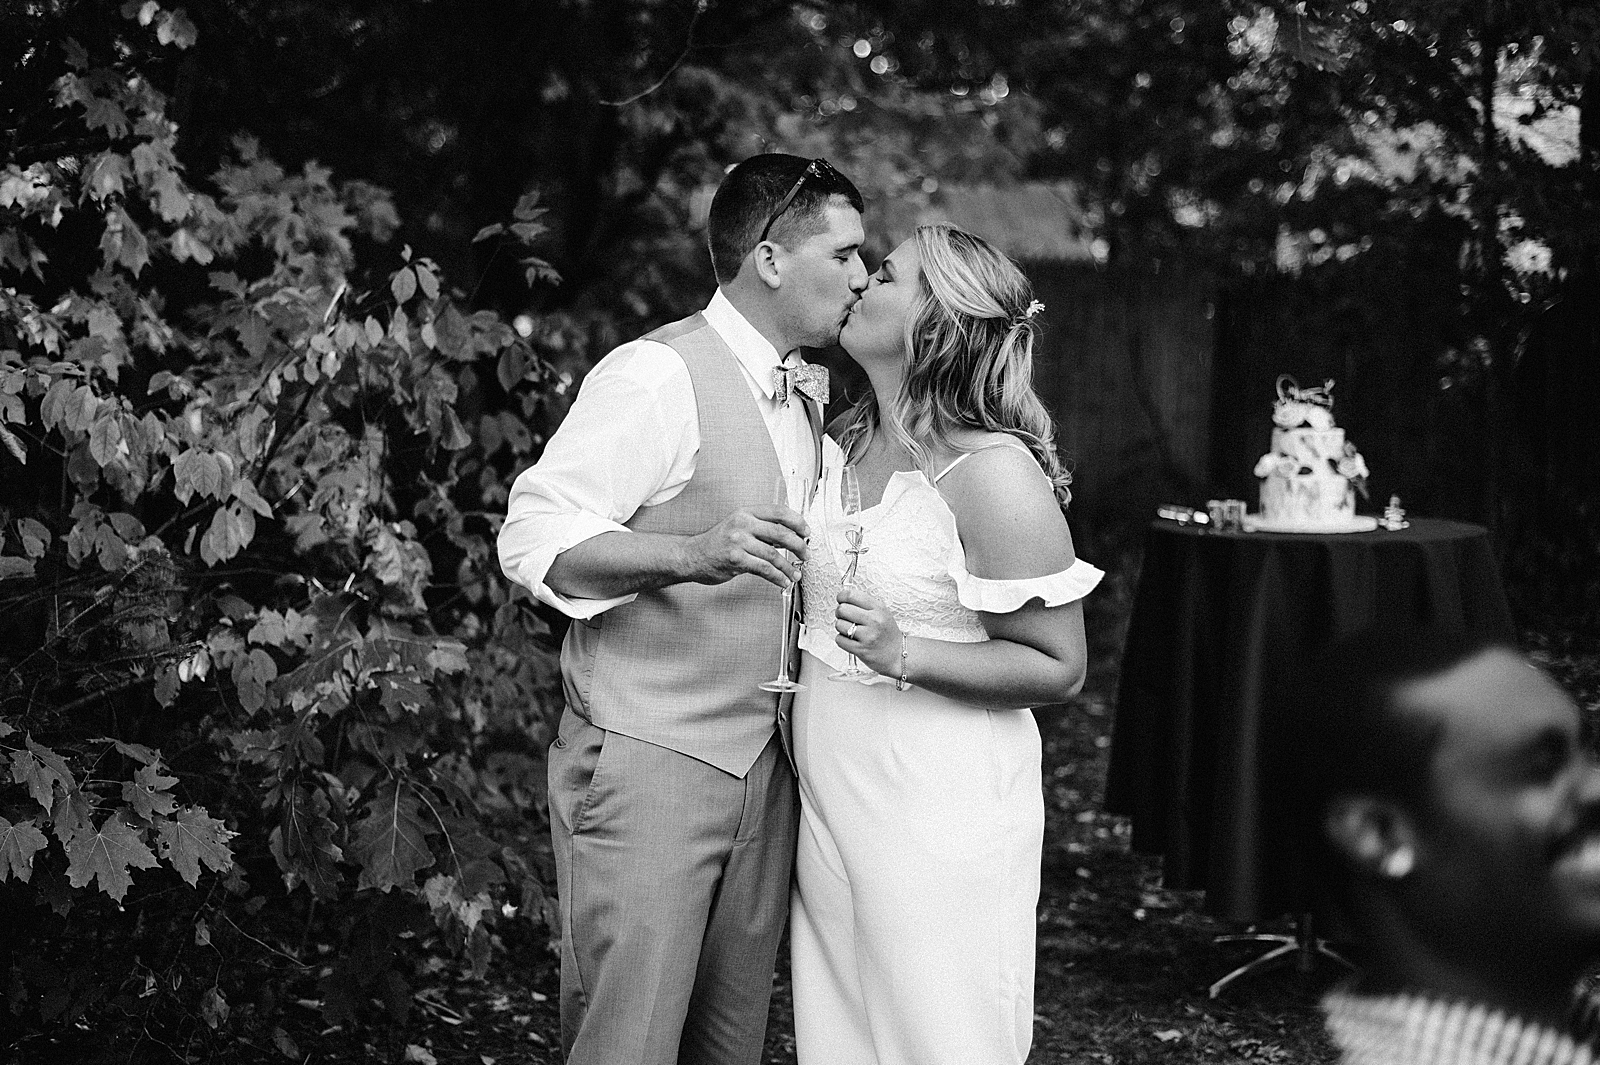 B&W Bride and Groom kissing with champaign glasses